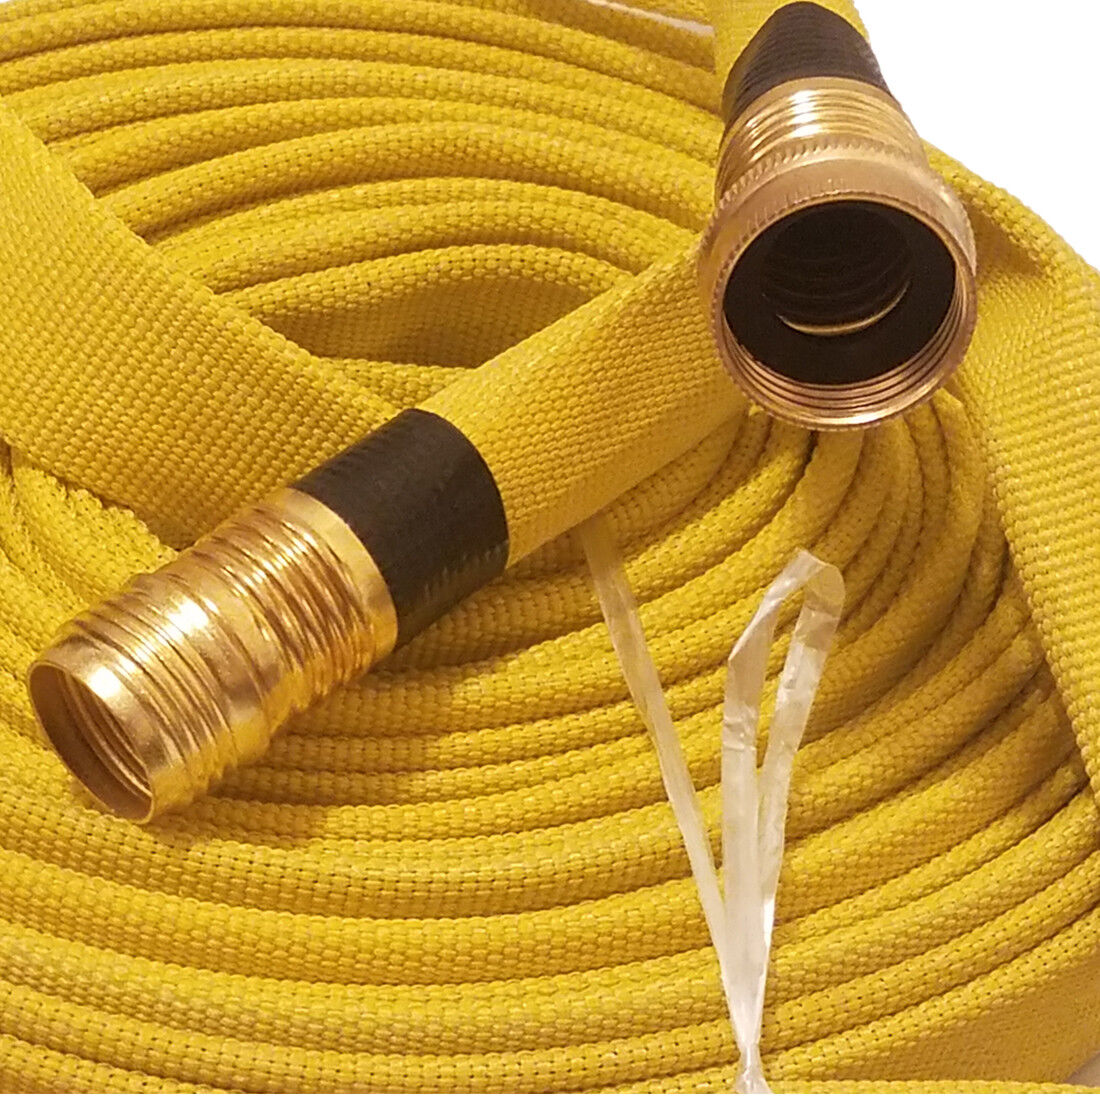 FORESTRY GRADE LAY FLAT FIRE HOSE, 3/4IN.X 50 FT., YELLOW, 250 PSI